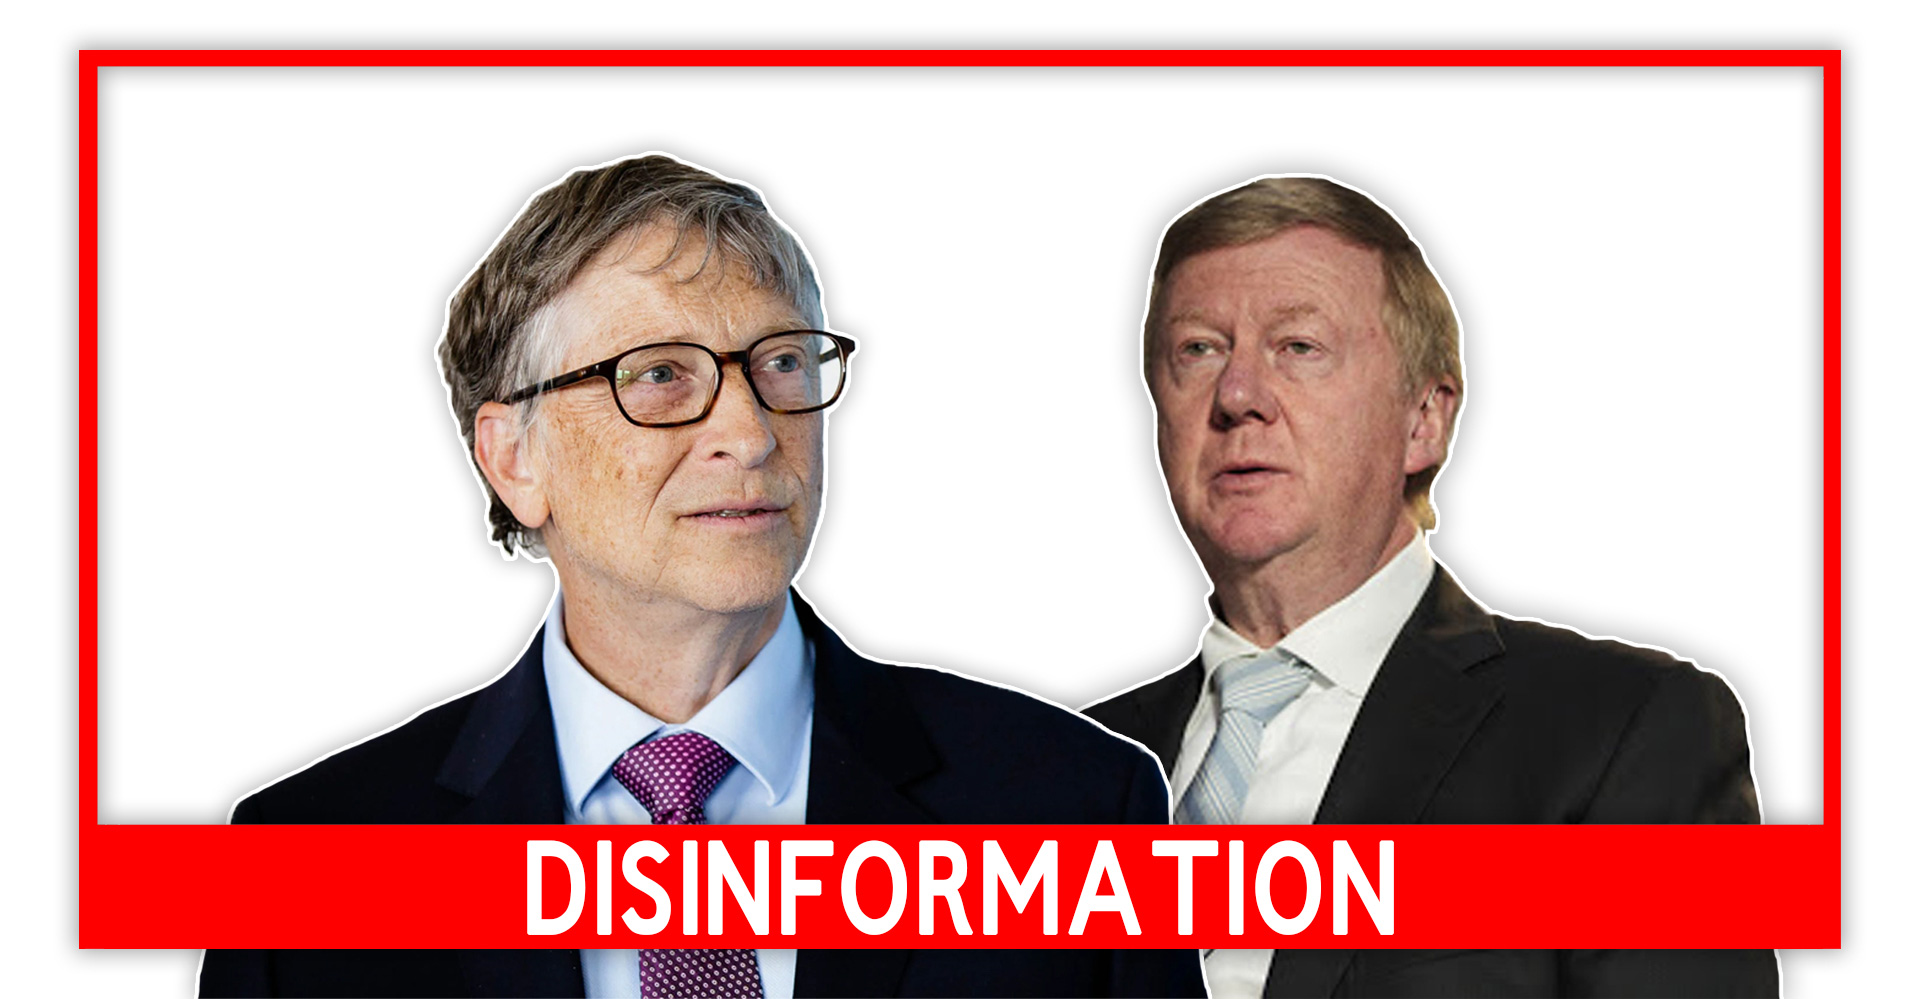 Disinformation About the Vaccination of Bill Gates’ Children, Depopulation, and Chubais